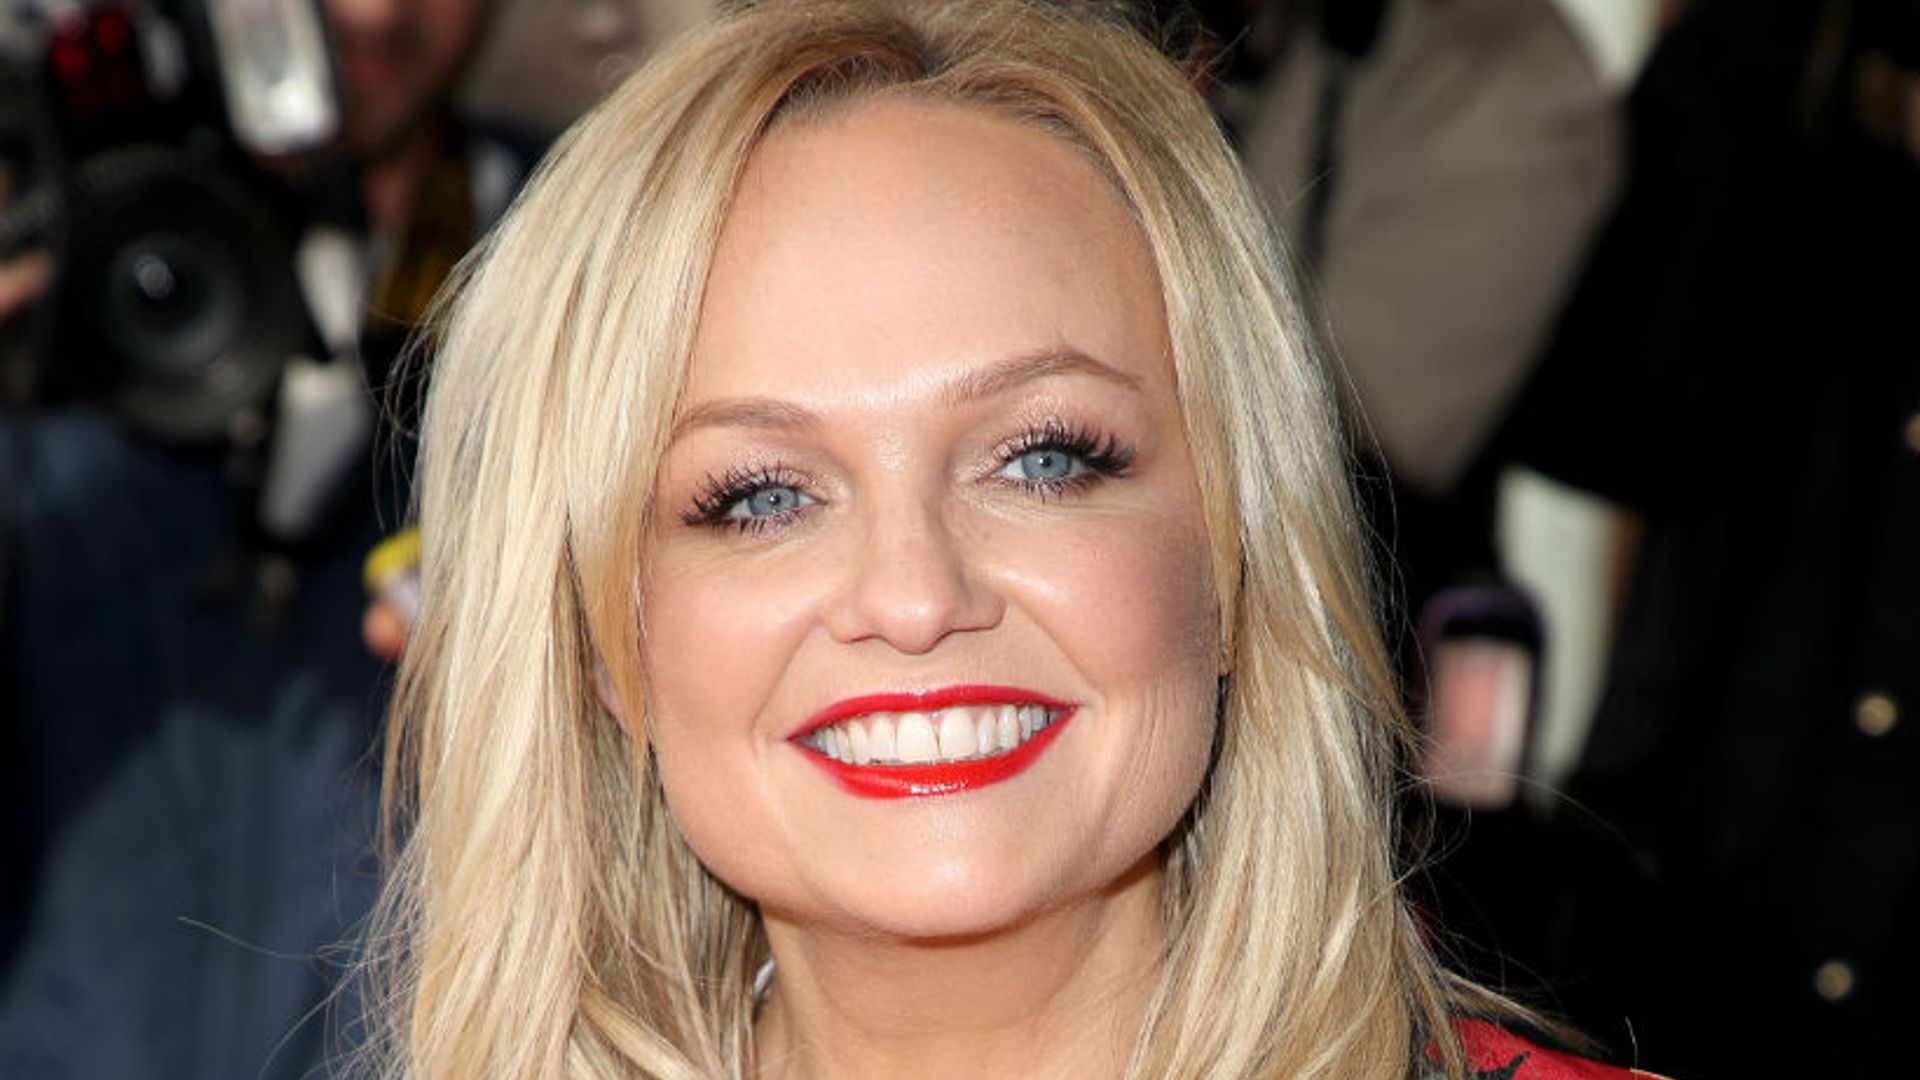 Emma Bunton looks incredibly youthful in new make-up video – take a look